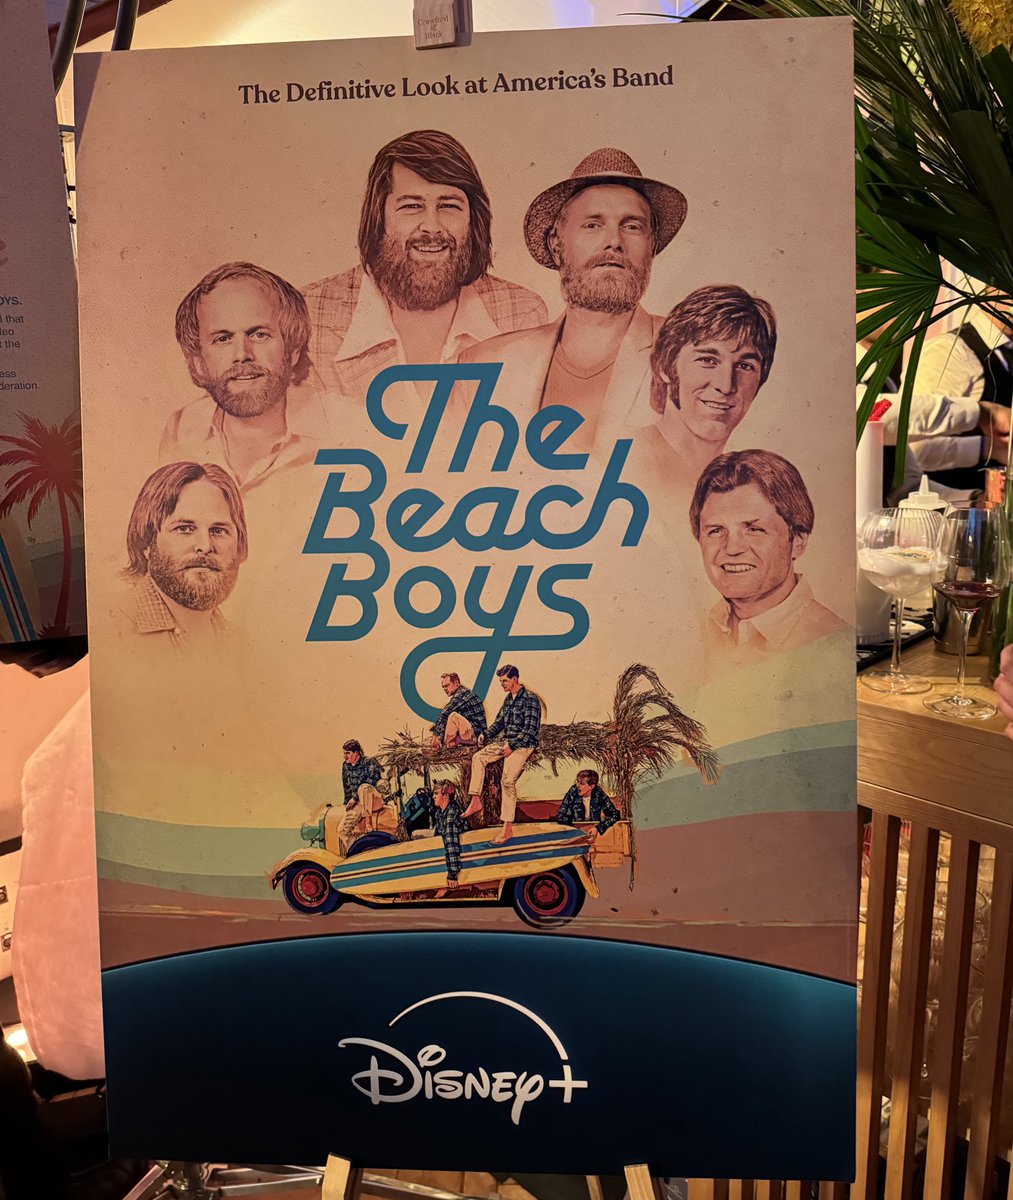 Good vibrations this evening at Abbey Road Studios hearing stories from Beach Boys Bruce Johnston and Mike Love, and director/producer Frank Marshall, whose documentary hits Disney+ on 24 May #TheBeachBoys @DisneyPlusUK @LeDoctor